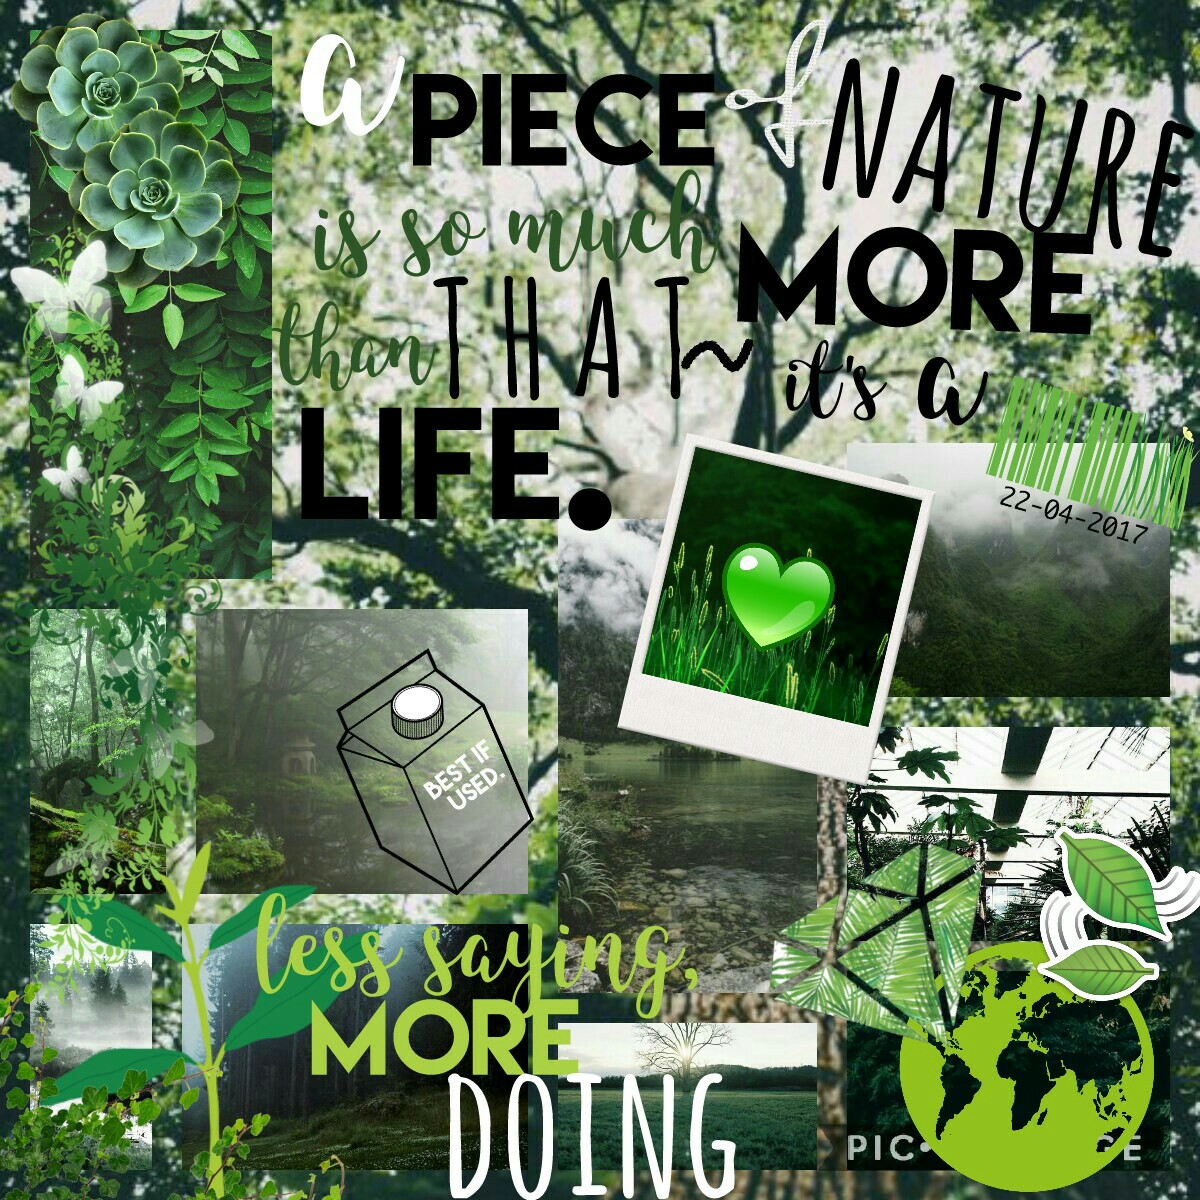 🌱 tap for more 🌱
hey guys, i wanted to create an earth day collage for a while now, and i'm happy i finally did! it's not that great, but i did put some effort into it. the milk carton was inspired by something i saw on a sign ^^ i have to go, bye!